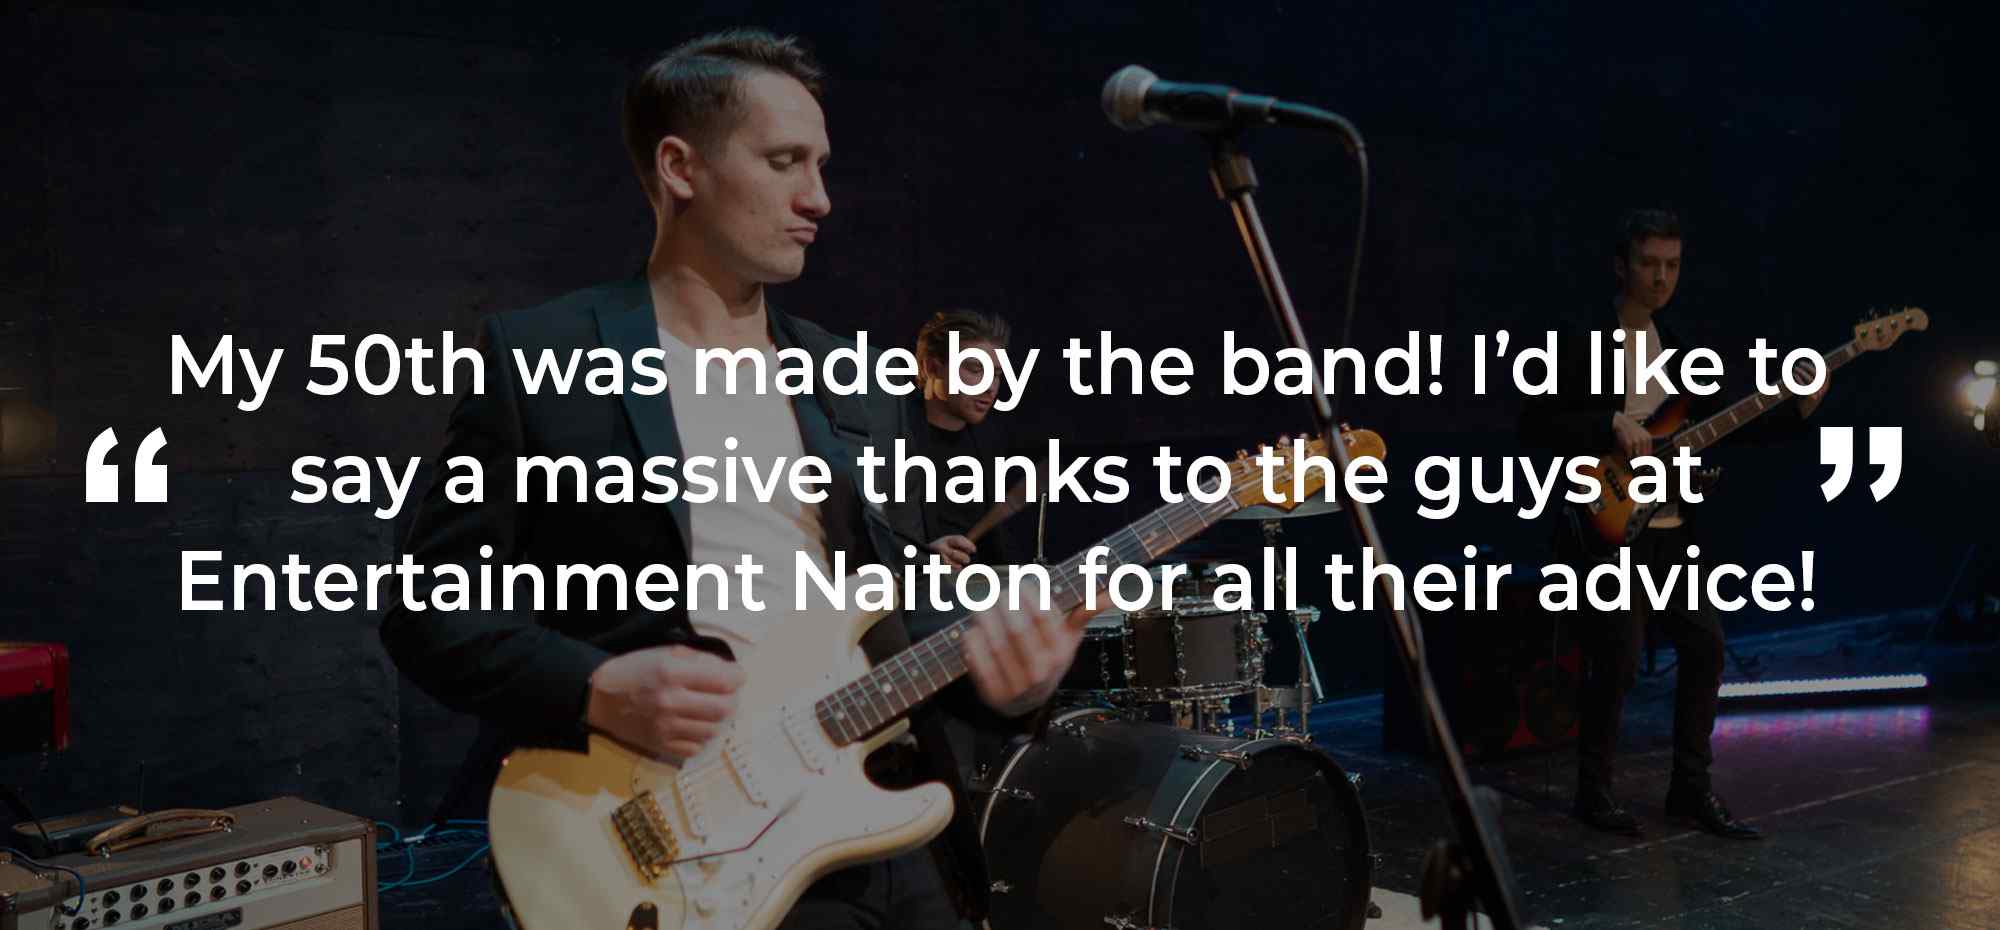 Client Review of a Party Band Lincolnshire